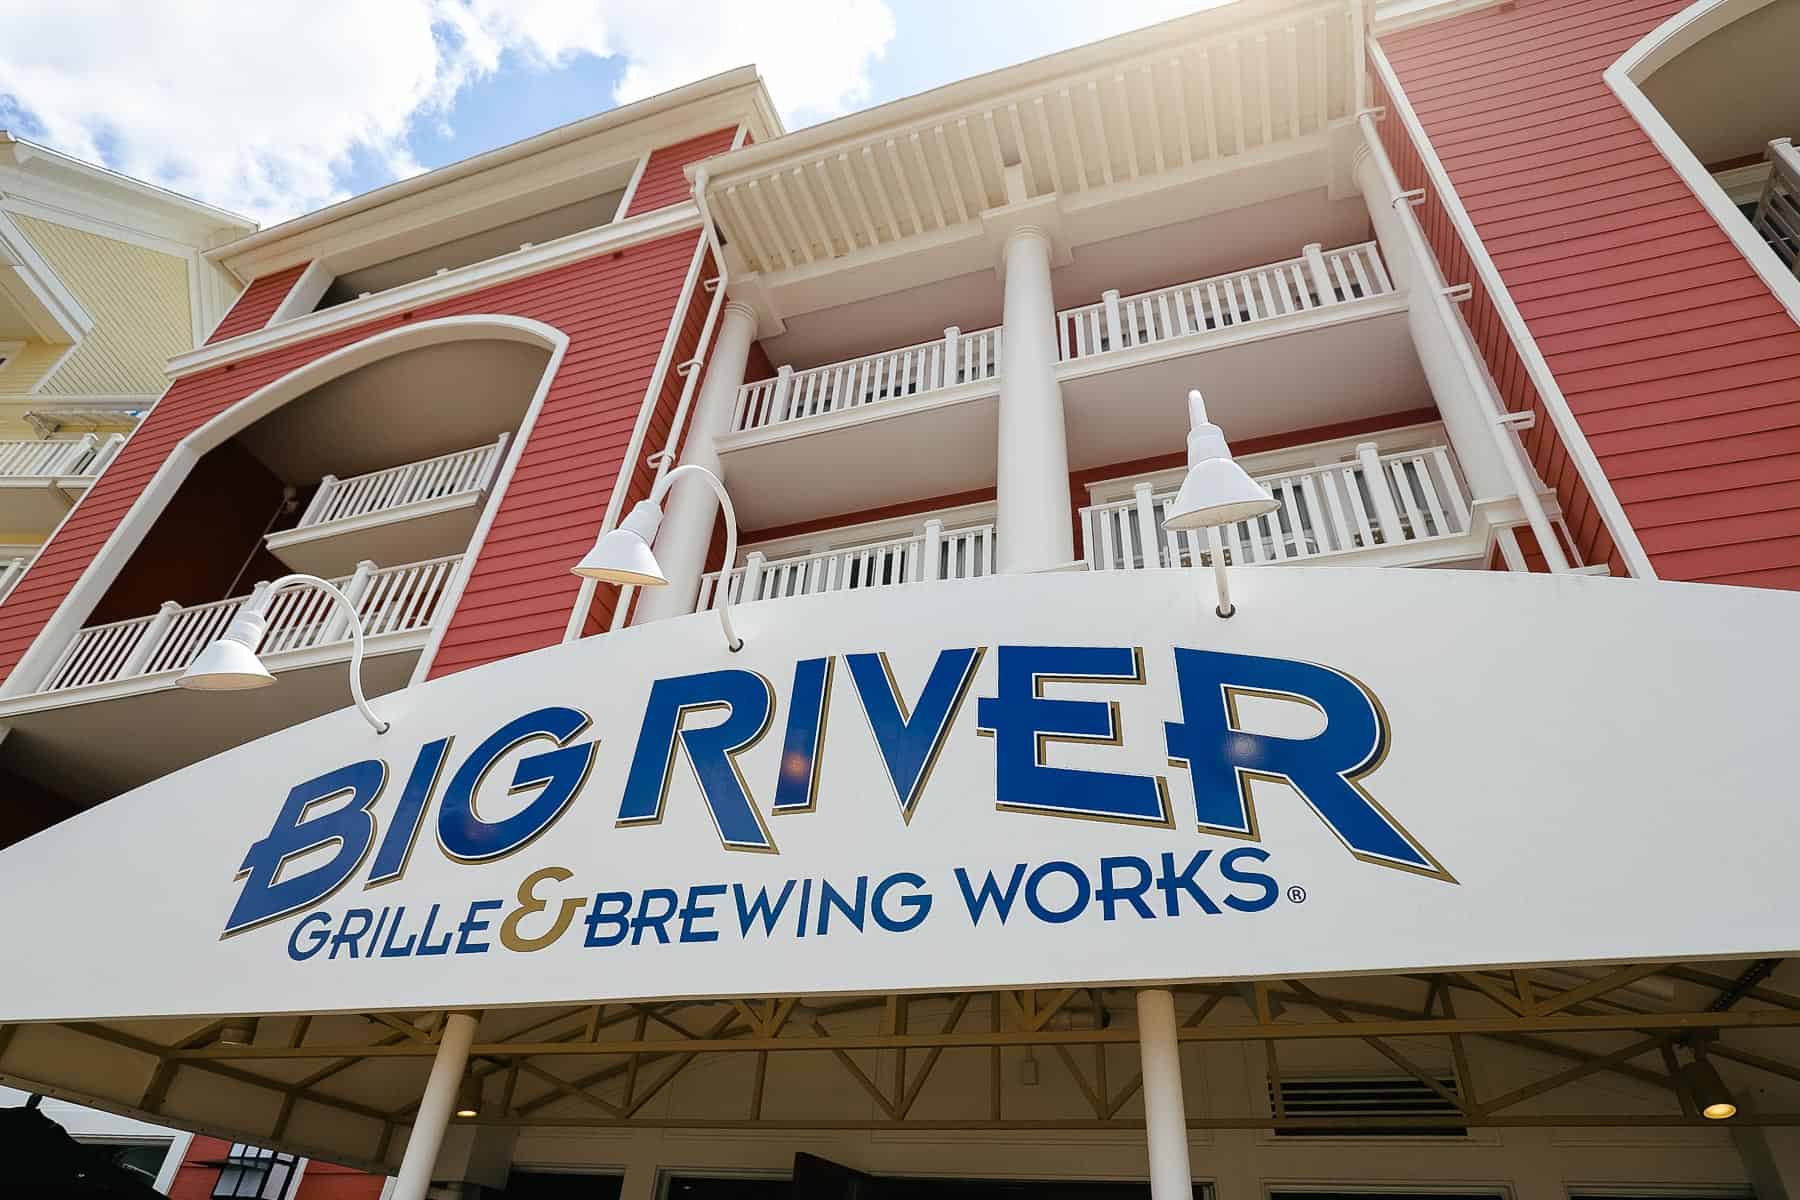 Big River Grille and Brewing Works 